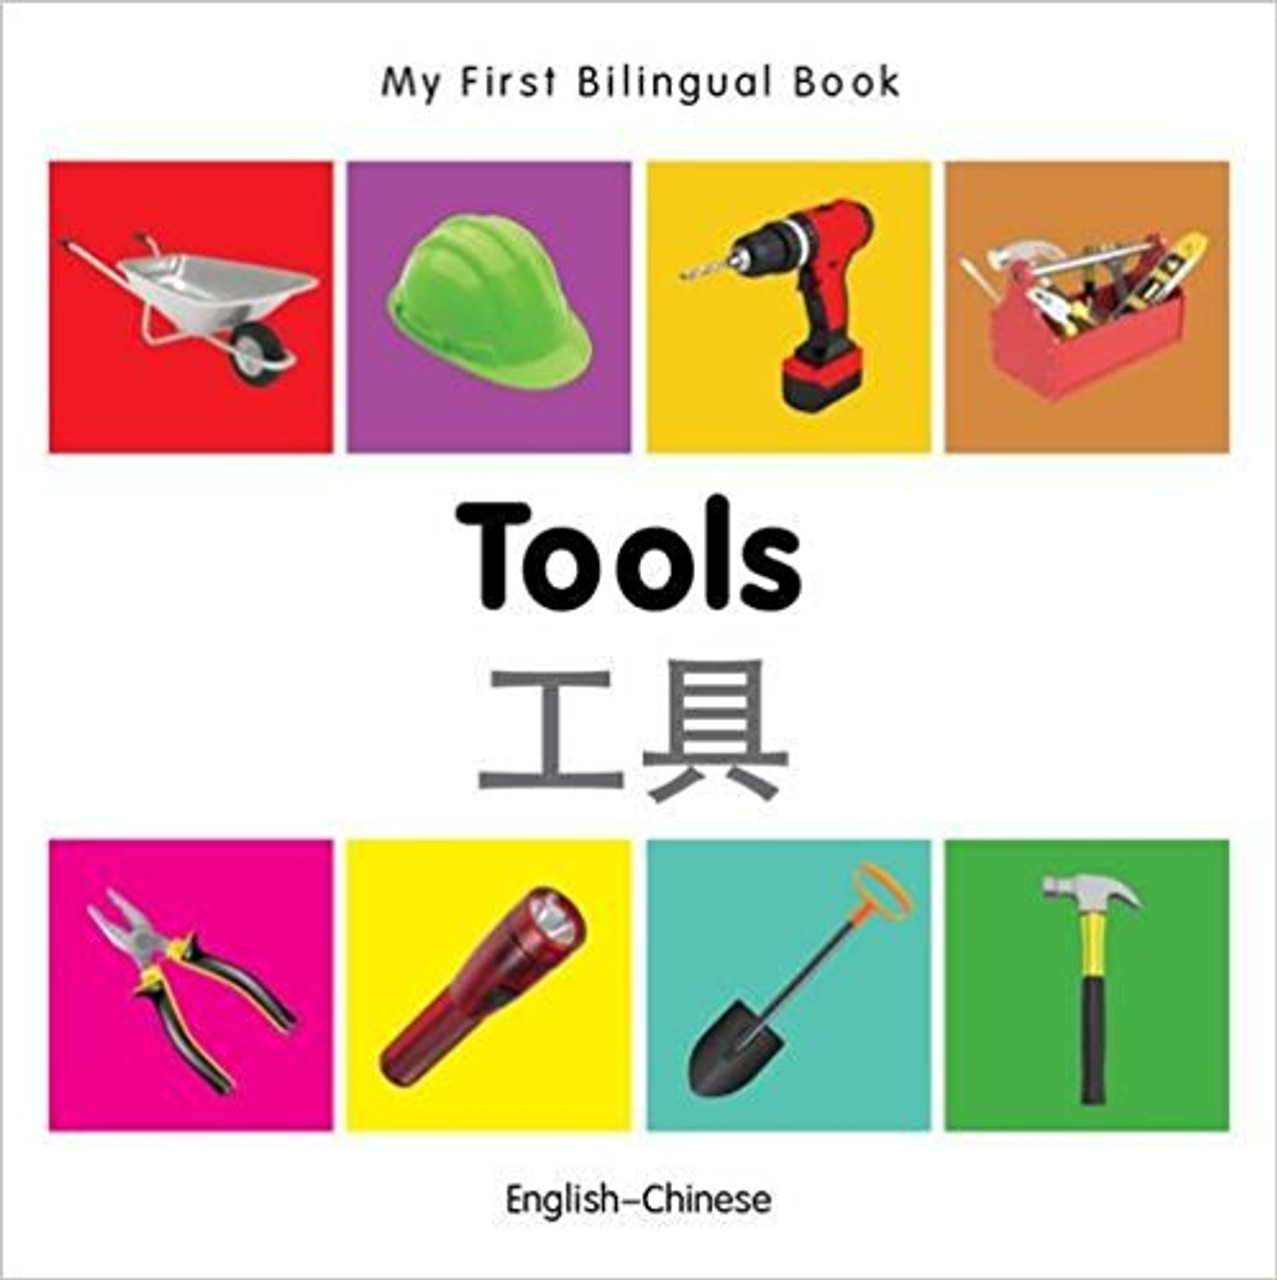 Tools by Millet Publishing